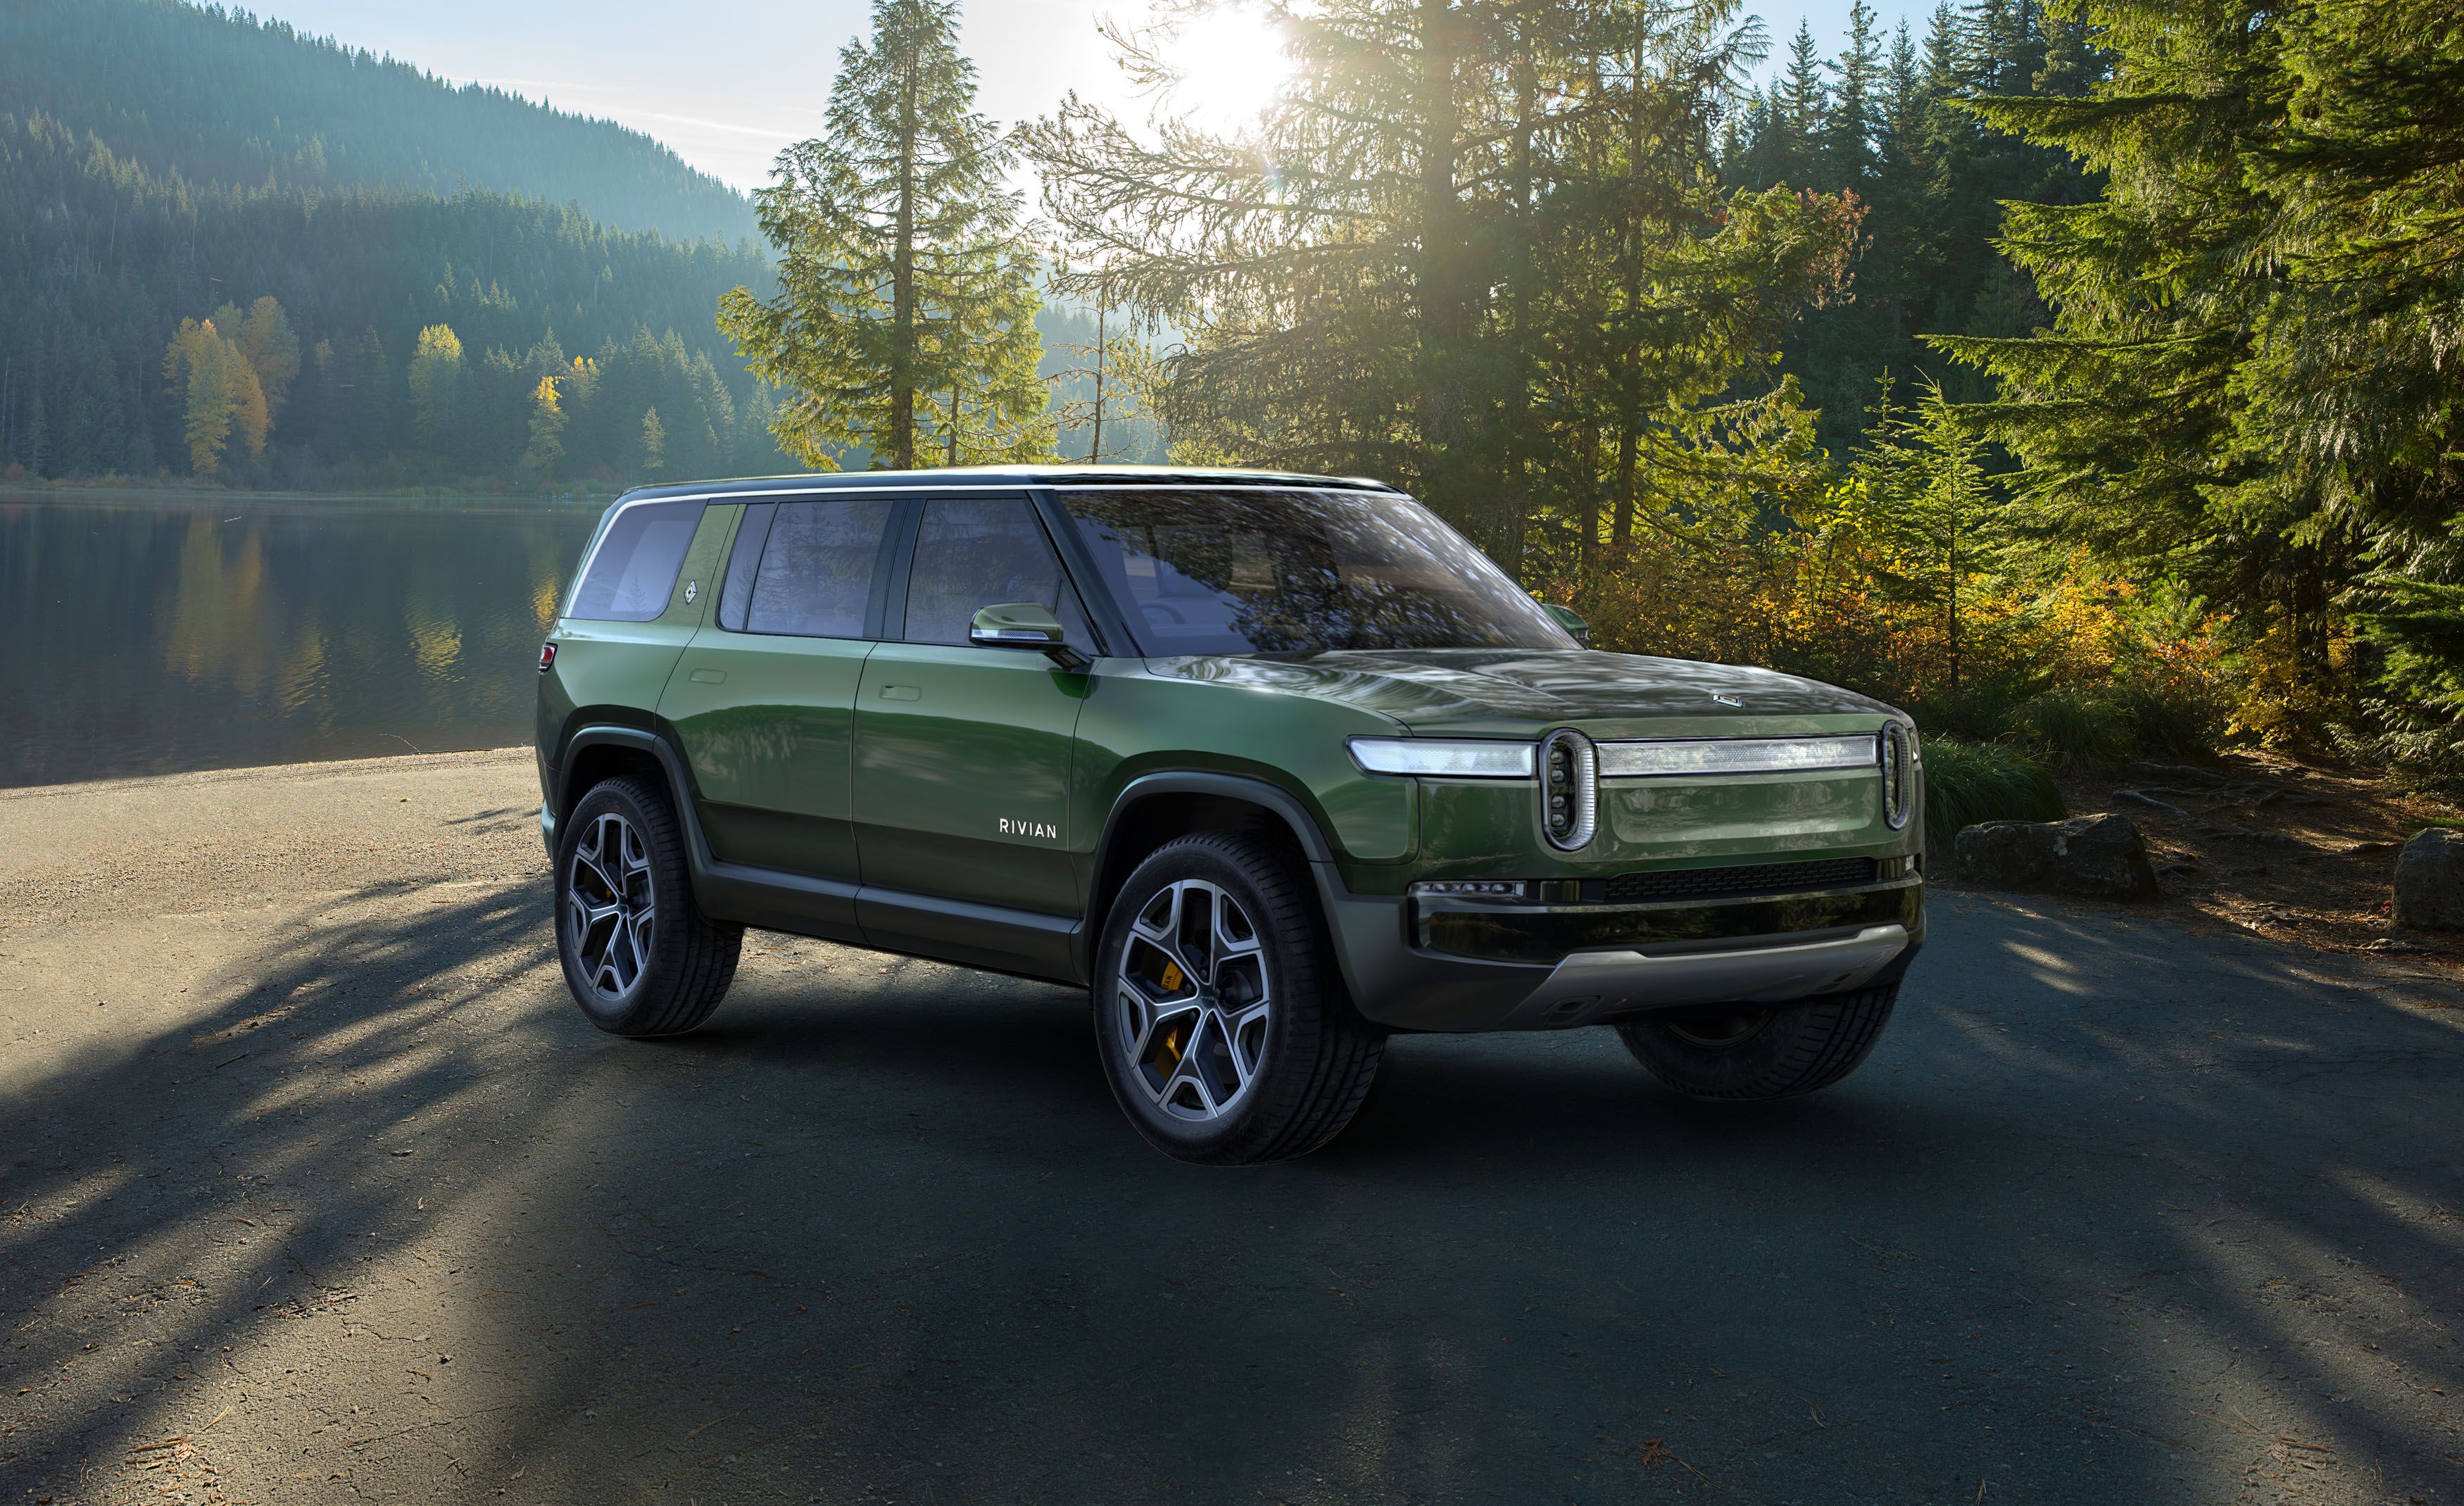 2022 Rivian R1s Suv Specs Details And Release Date Hot Sex Picture